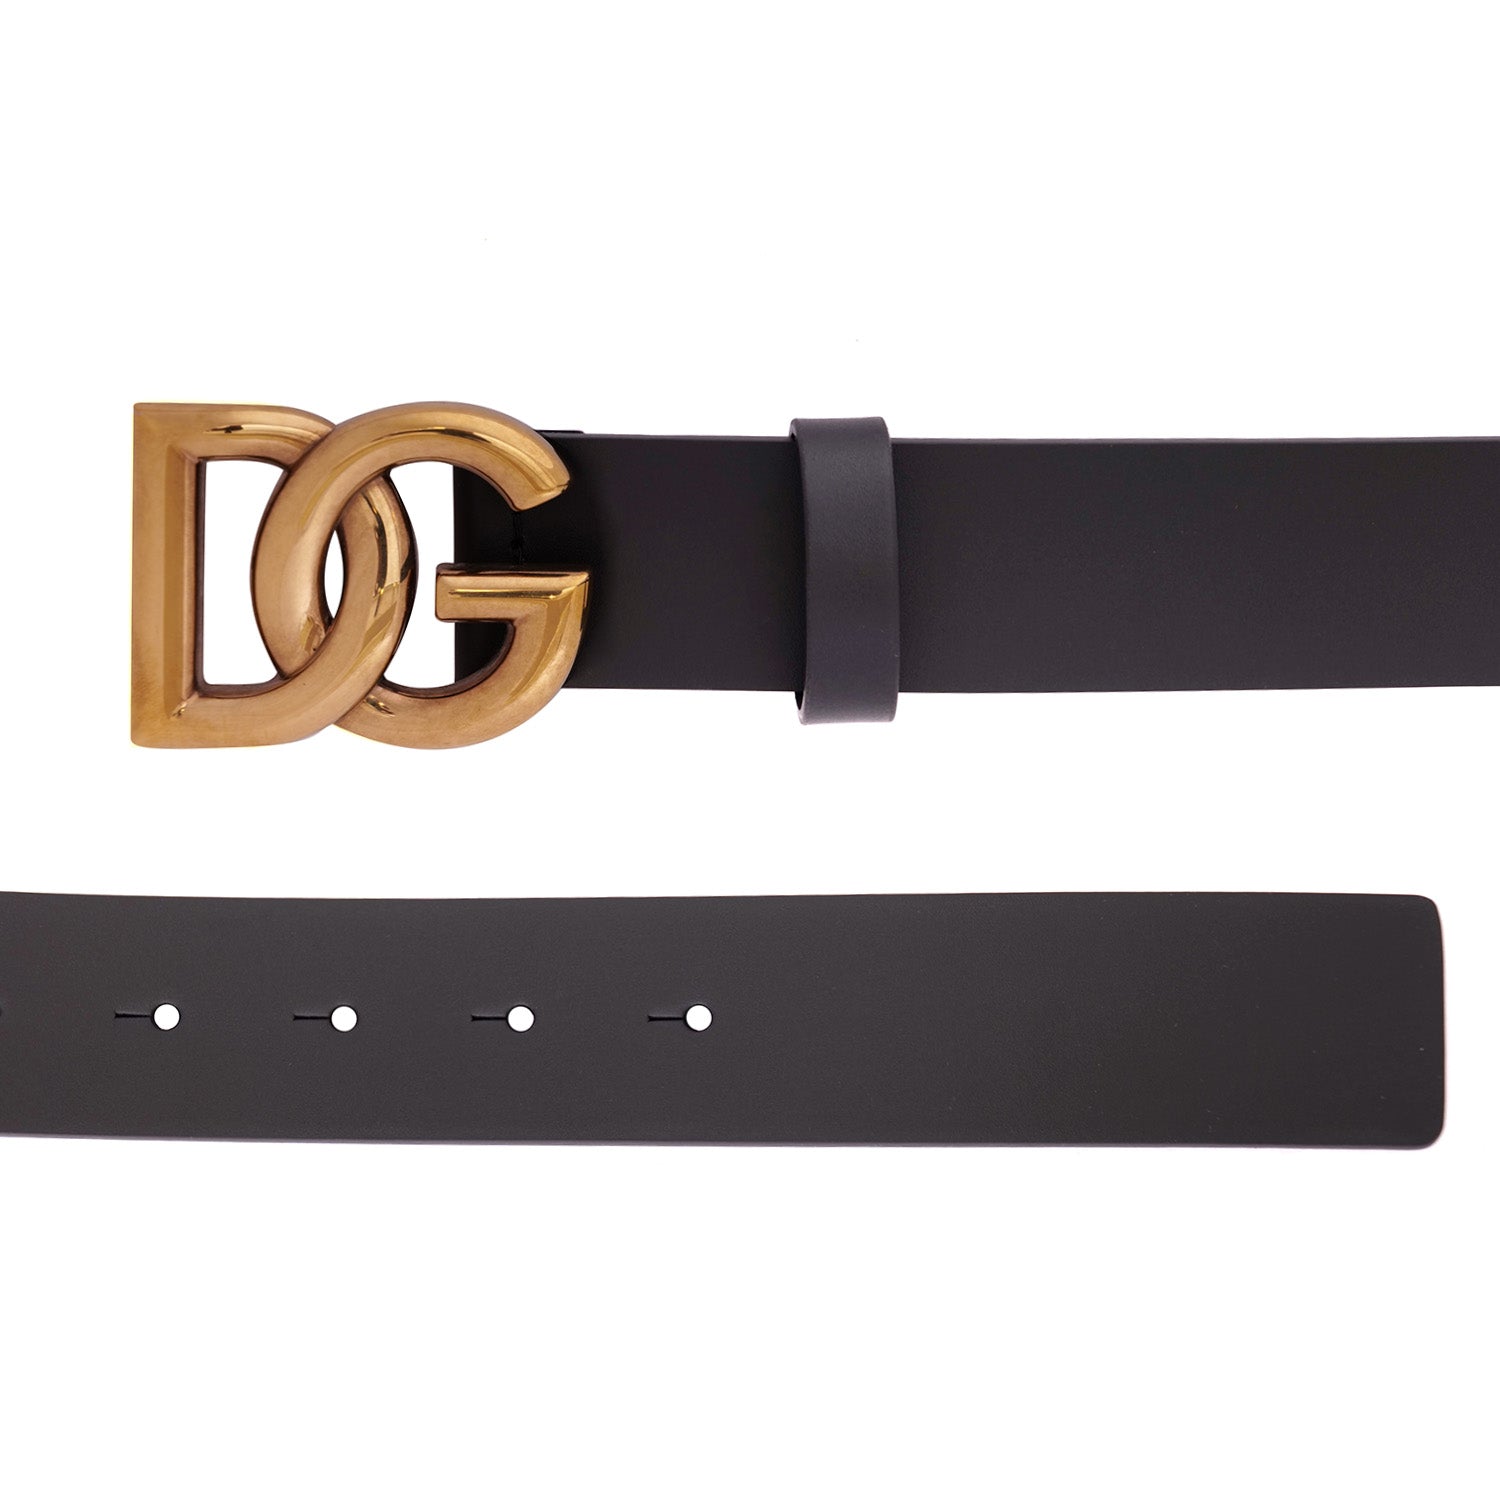 D&G LEATHER BELT WITH DG LOGO SHINY BUCKLE